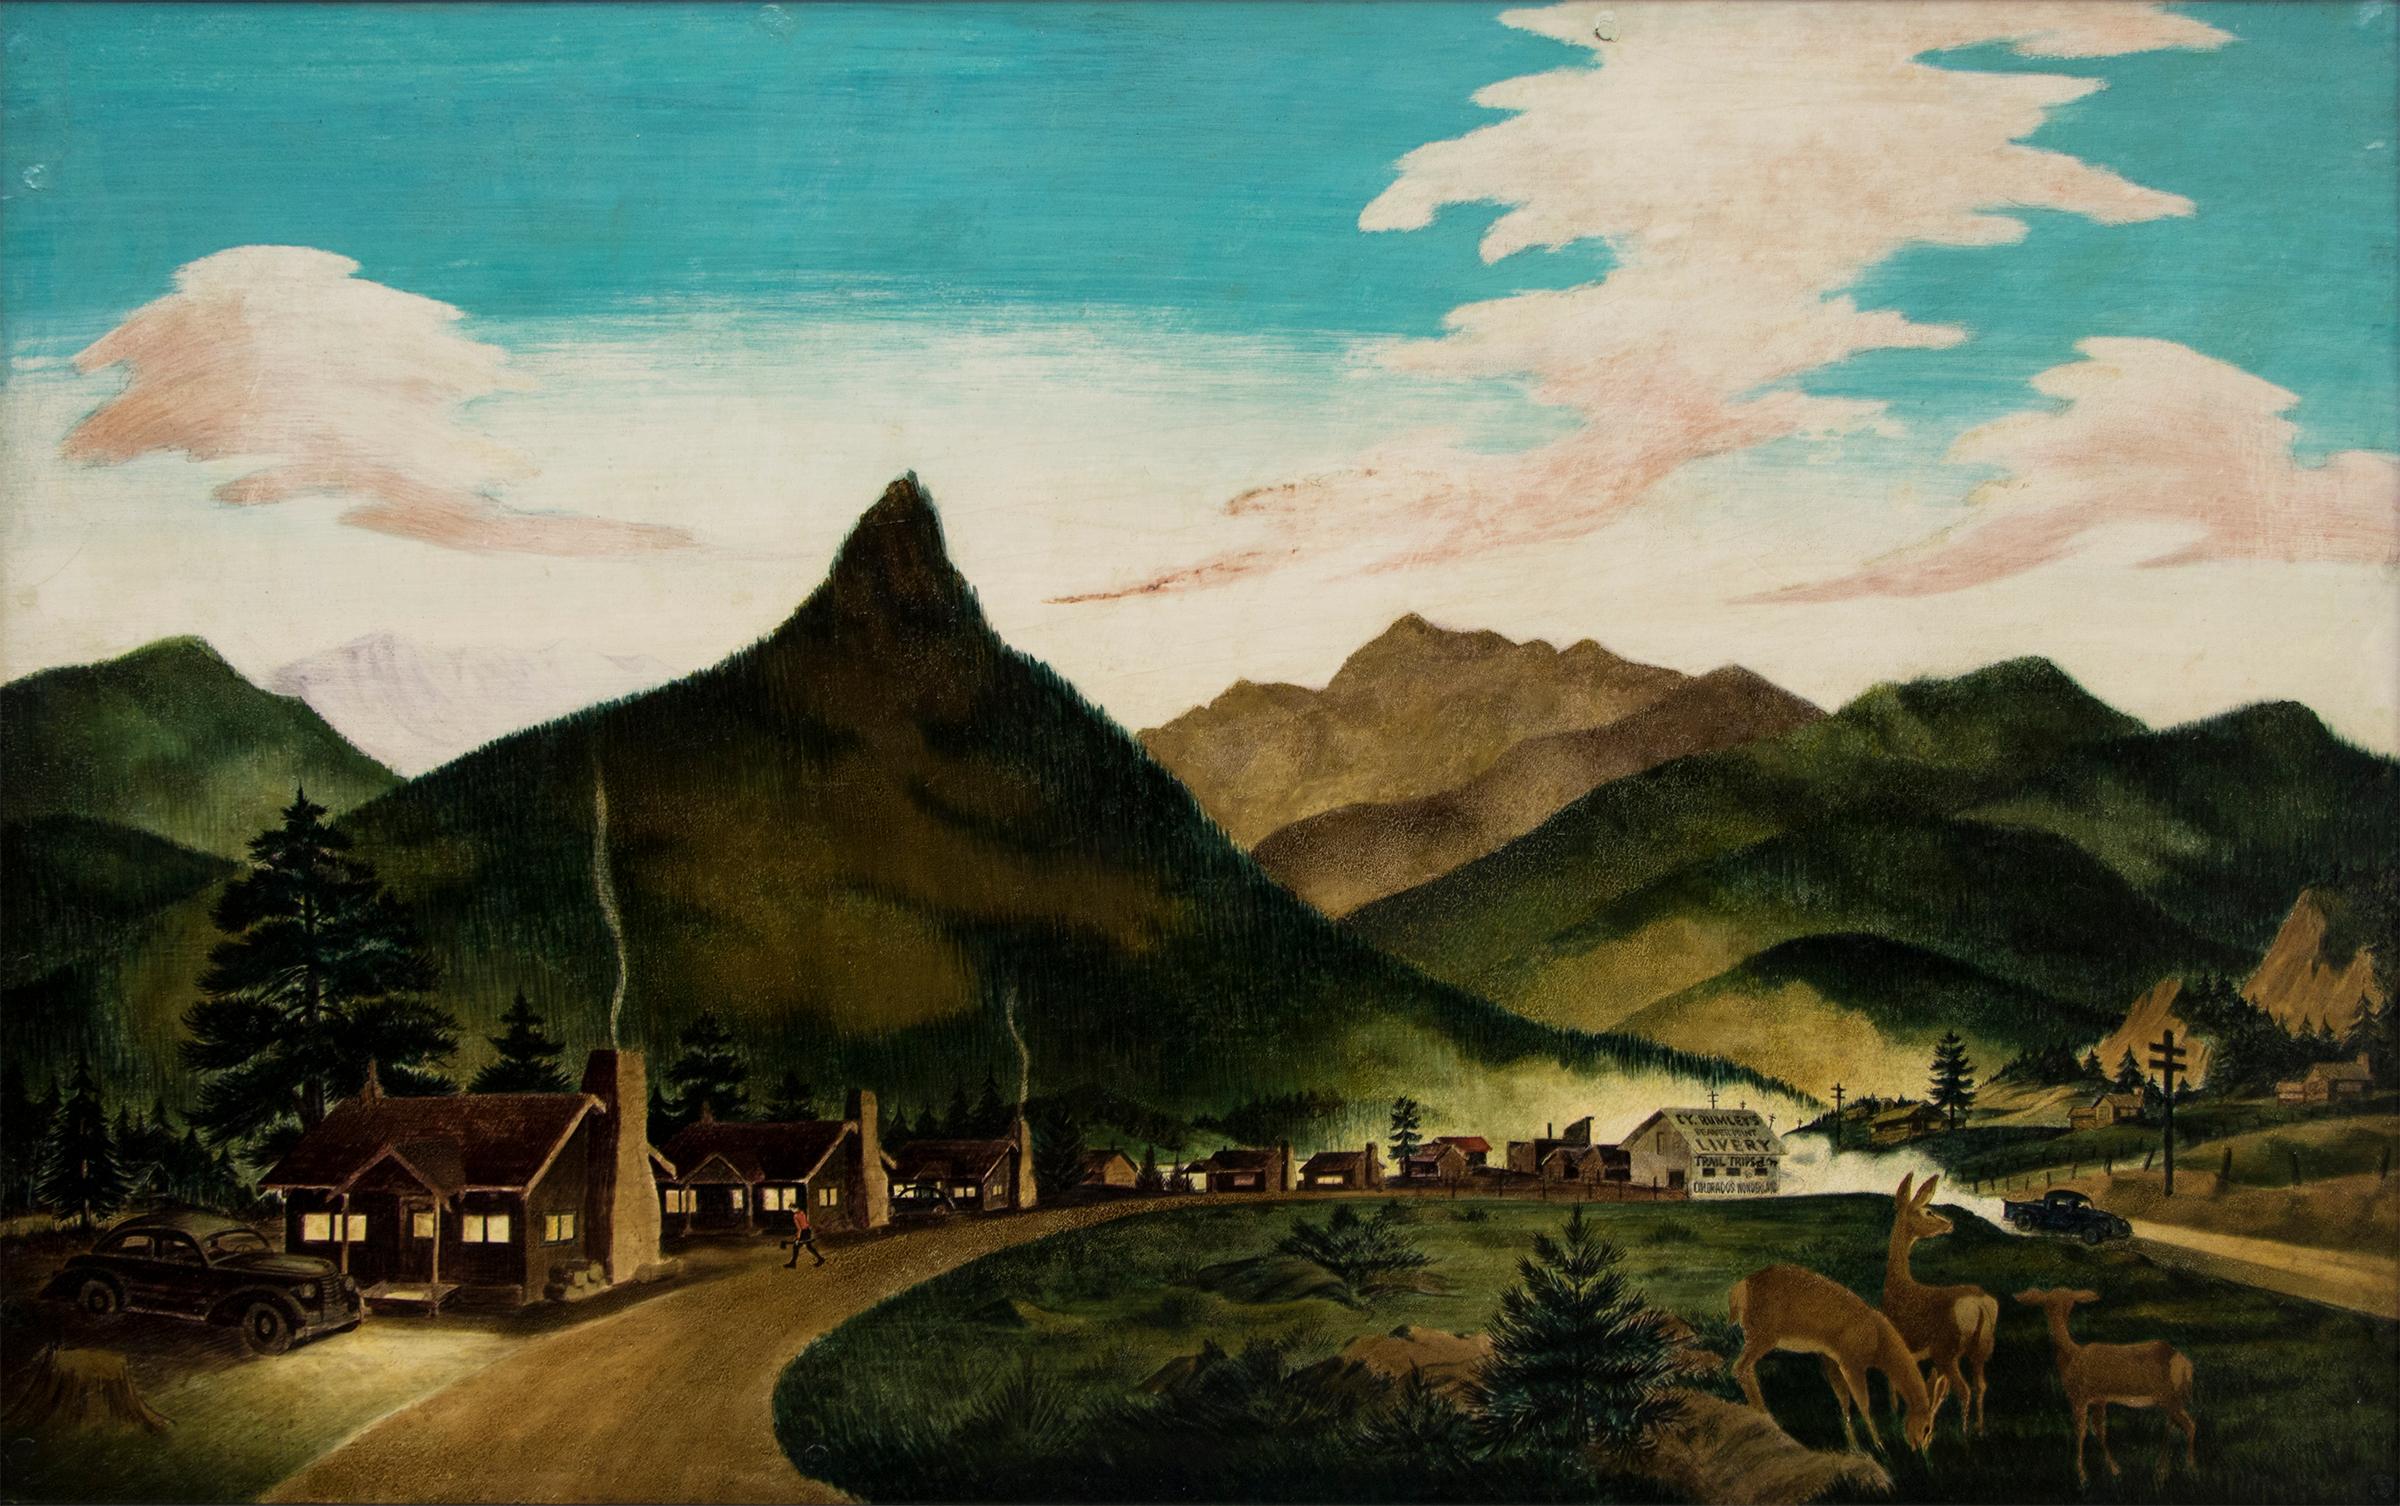 Untitled (Cy Rumley's Livery, Beaver Point, Estes Park, Colorado) - Painting by James Russell Sherman